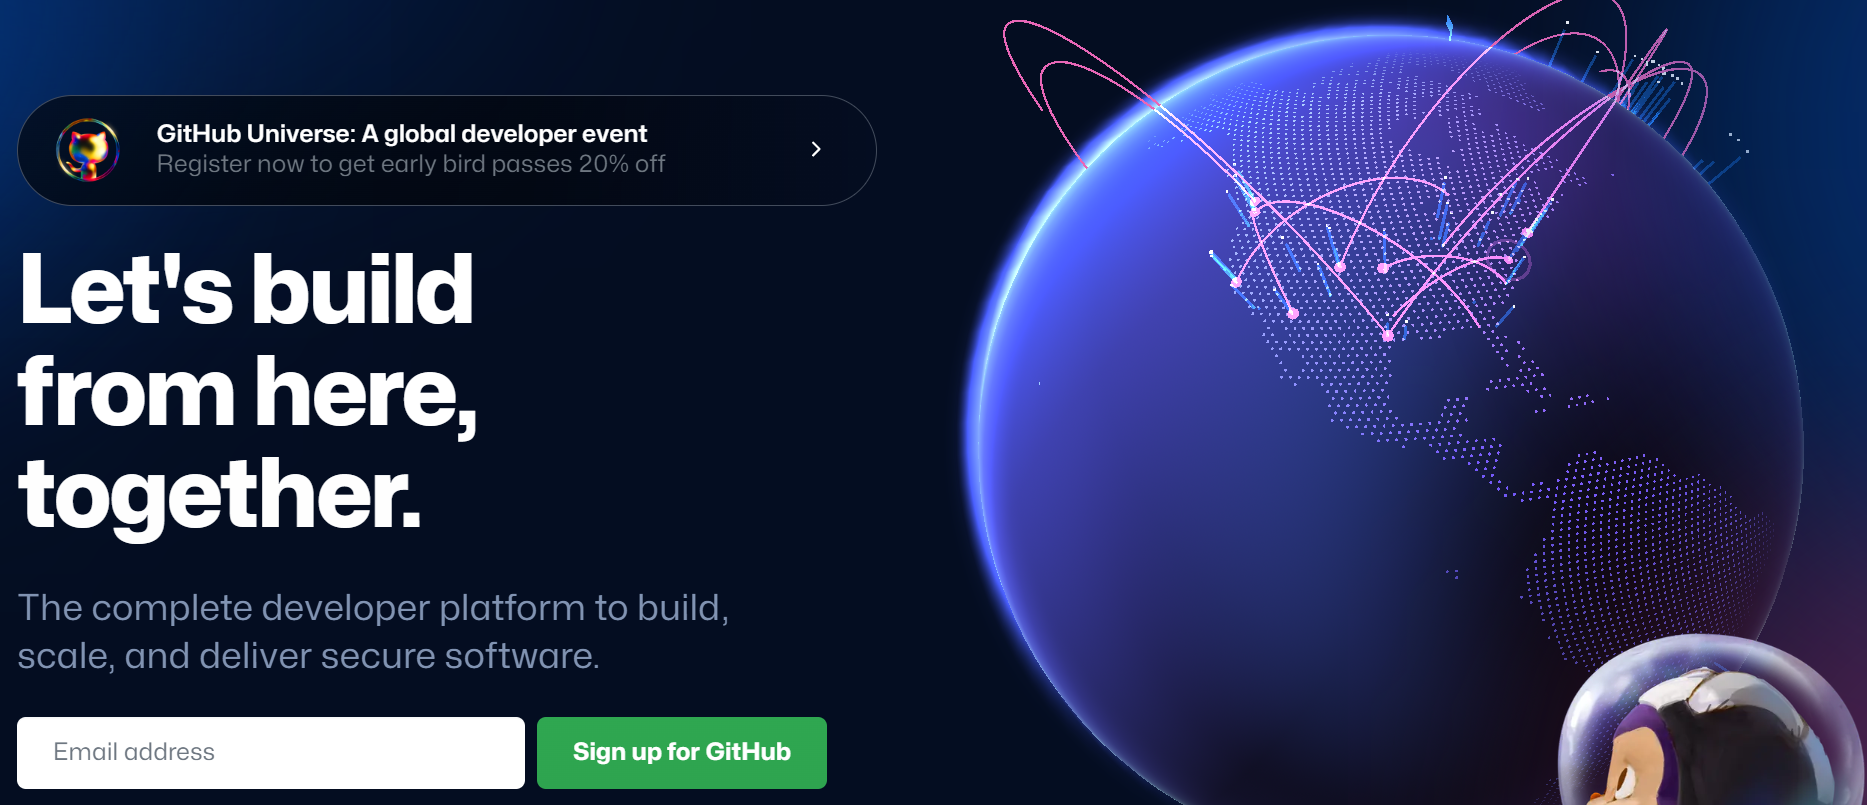 The signup form for Github